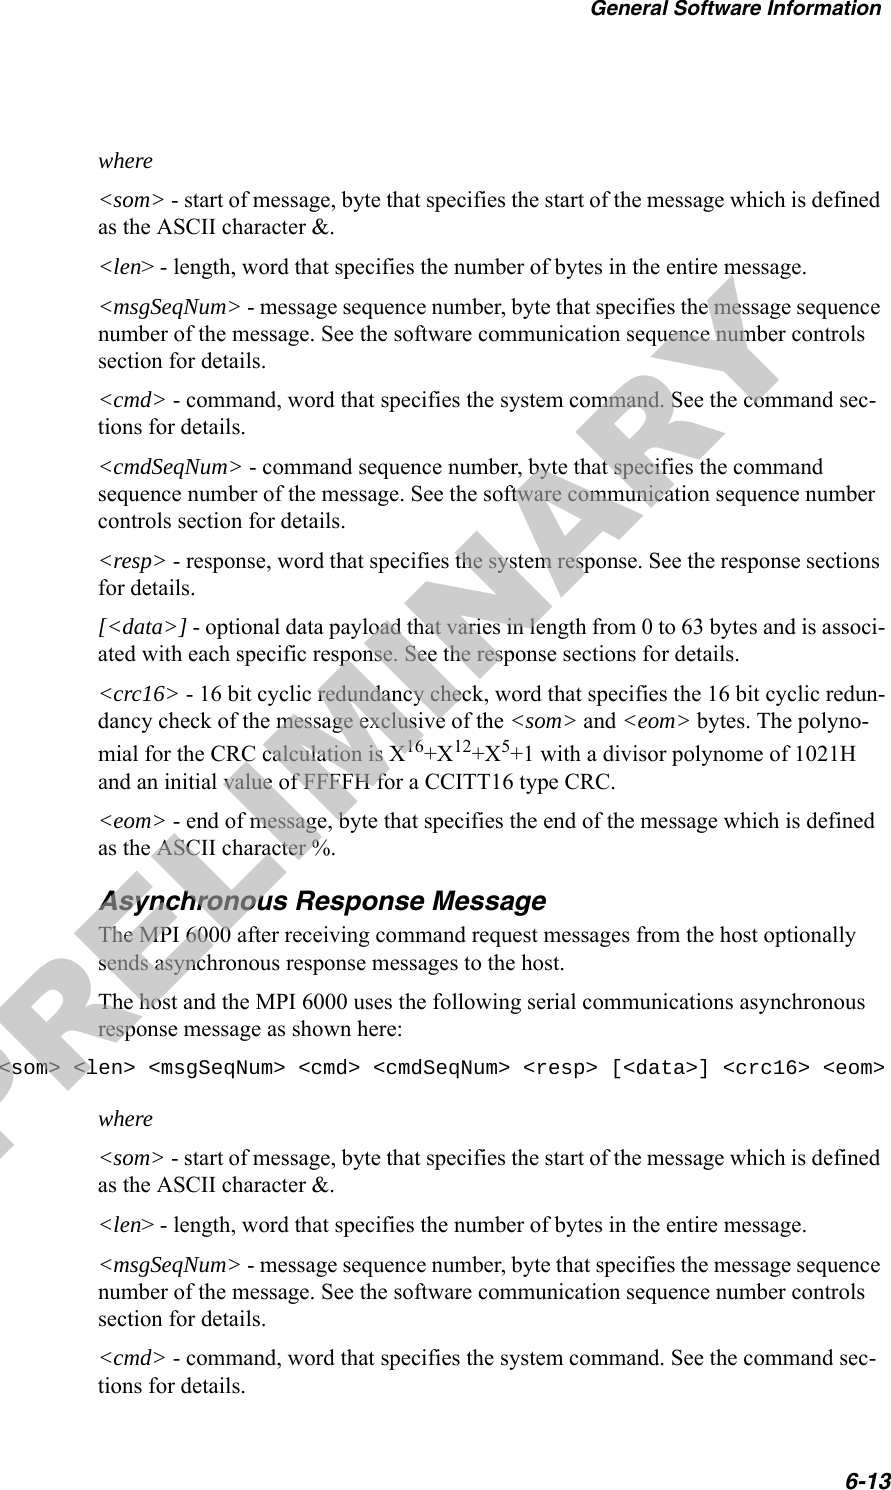 General Software Information6-13where&lt;som&gt; - start of message, byte that specifies the start of the message which is defined as the ASCII character &amp;.&lt;len&gt; - length, word that specifies the number of bytes in the entire message.&lt;msgSeqNum&gt; - message sequence number, byte that specifies the message sequence number of the message. See the software communication sequence number controls section for details.&lt;cmd&gt; - command, word that specifies the system command. See the command sec-tions for details.&lt;cmdSeqNum&gt; - command sequence number, byte that specifies the command sequence number of the message. See the software communication sequence number controls section for details.&lt;resp&gt; - response, word that specifies the system response. See the response sections for details.[&lt;data&gt;] - optional data payload that varies in length from 0 to 63 bytes and is associ-ated with each specific response. See the response sections for details.&lt;crc16&gt; - 16 bit cyclic redundancy check, word that specifies the 16 bit cyclic redun-dancy check of the message exclusive of the &lt;som&gt; and &lt;eom&gt; bytes. The polyno-mial for the CRC calculation is X16+X12+X5+1 with a divisor polynome of 1021H and an initial value of FFFFH for a CCITT16 type CRC.&lt;eom&gt; - end of message, byte that specifies the end of the message which is defined as the ASCII character %.Asynchronous Response MessageThe MPI 6000 after receiving command request messages from the host optionally sends asynchronous response messages to the host.The host and the MPI 6000 uses the following serial communications asynchronous response message as shown here:&lt;som&gt; &lt;len&gt; &lt;msgSeqNum&gt; &lt;cmd&gt; &lt;cmdSeqNum&gt; &lt;resp&gt; [&lt;data&gt;] &lt;crc16&gt; &lt;eom&gt;where&lt;som&gt; - start of message, byte that specifies the start of the message which is defined as the ASCII character &amp;.&lt;len&gt; - length, word that specifies the number of bytes in the entire message.&lt;msgSeqNum&gt; - message sequence number, byte that specifies the message sequence number of the message. See the software communication sequence number controls section for details.&lt;cmd&gt; - command, word that specifies the system command. See the command sec-tions for details.PRELIMINARY